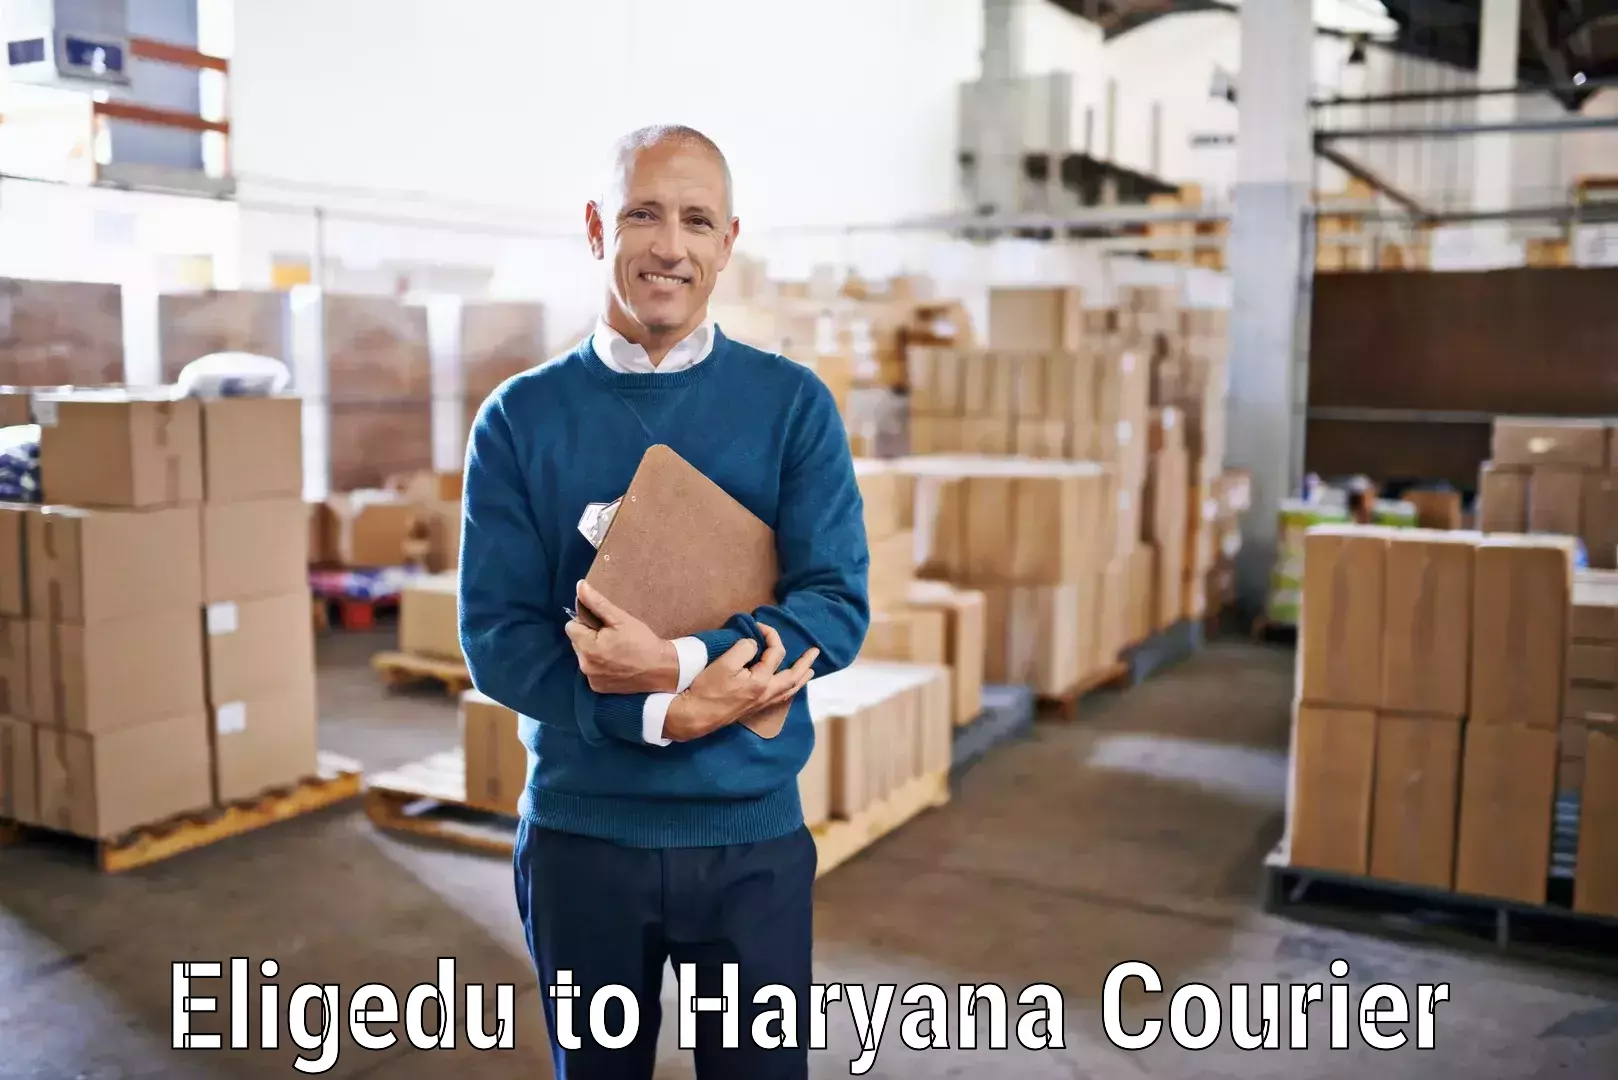 Full-service courier options Eligedu to Hansi